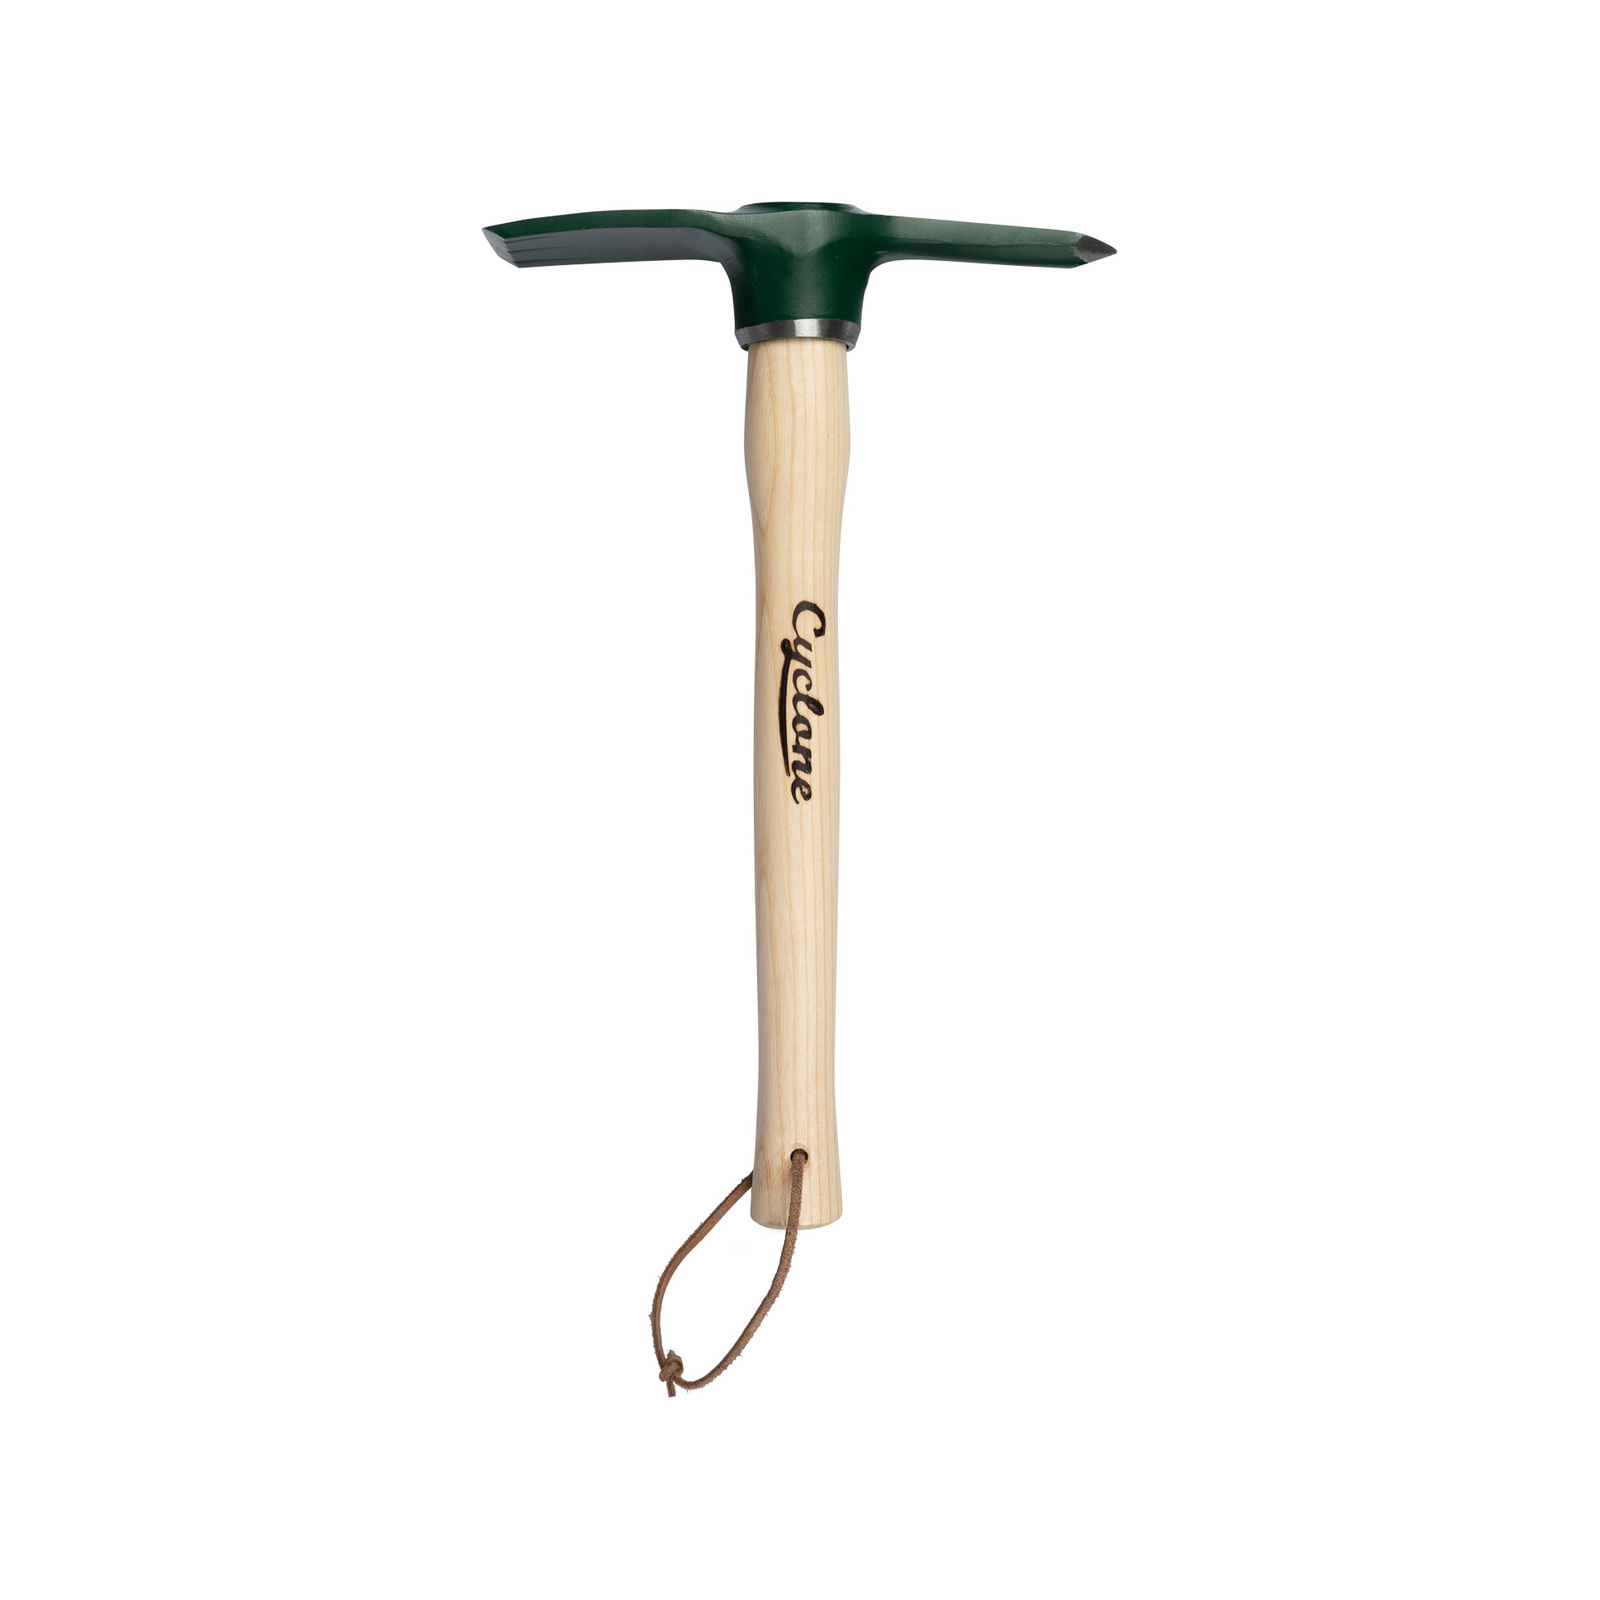 Oeste Anestésico Otros lugares Cyclone Forged Timber Mini Pick-Hoe - Bunnings Australia